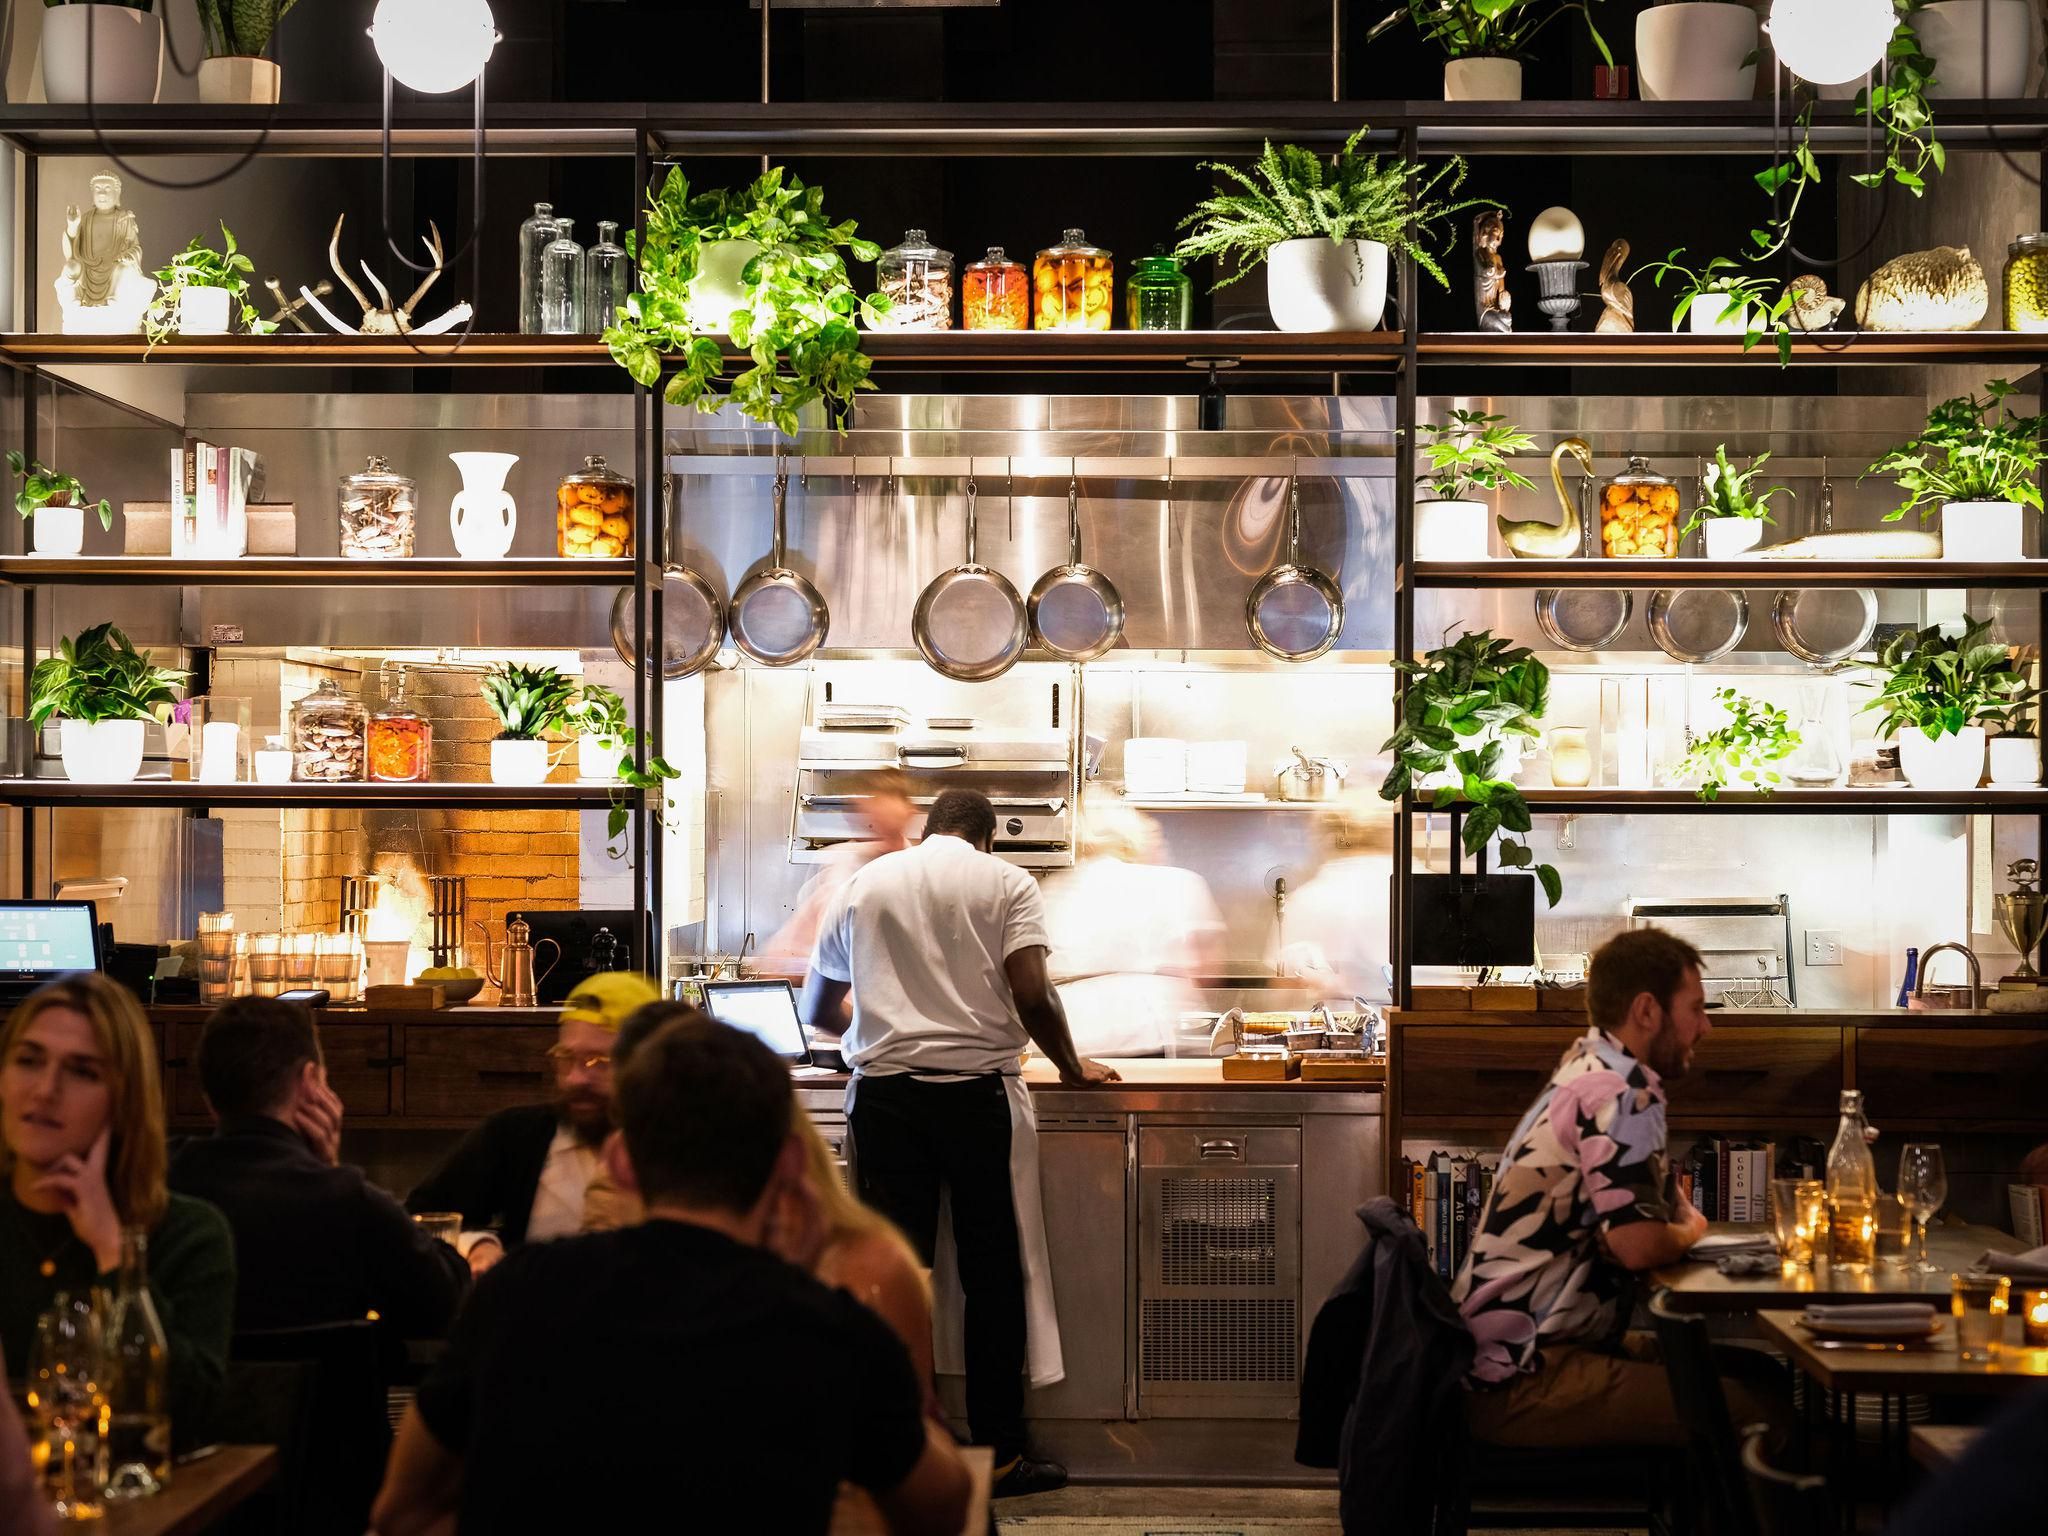 First Taste: Every night is a dinner party at Flour + Water's new Penny Roma